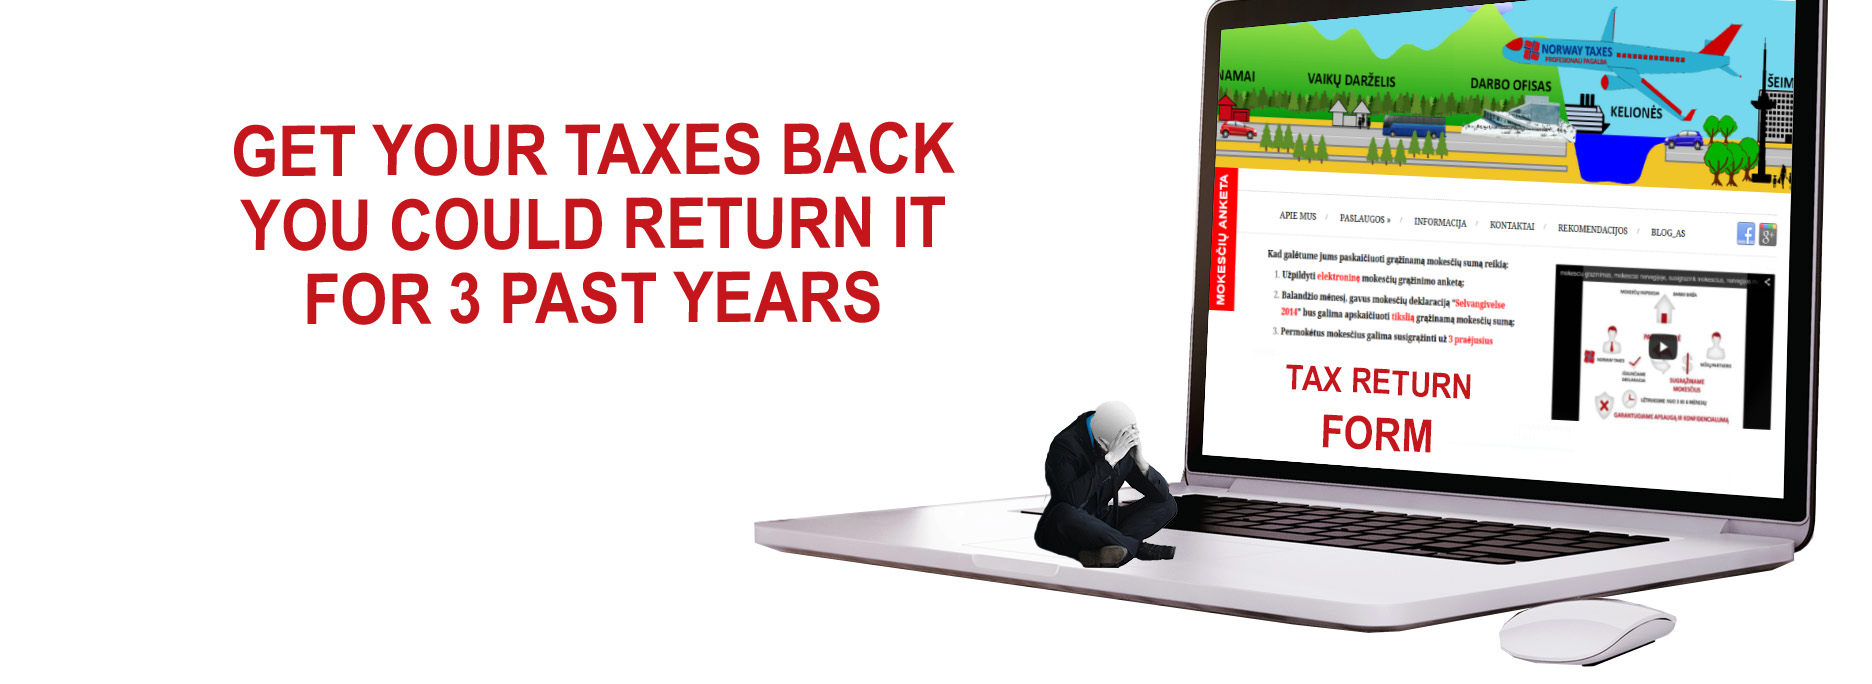 tax-refund-in-norway-norway-taxes